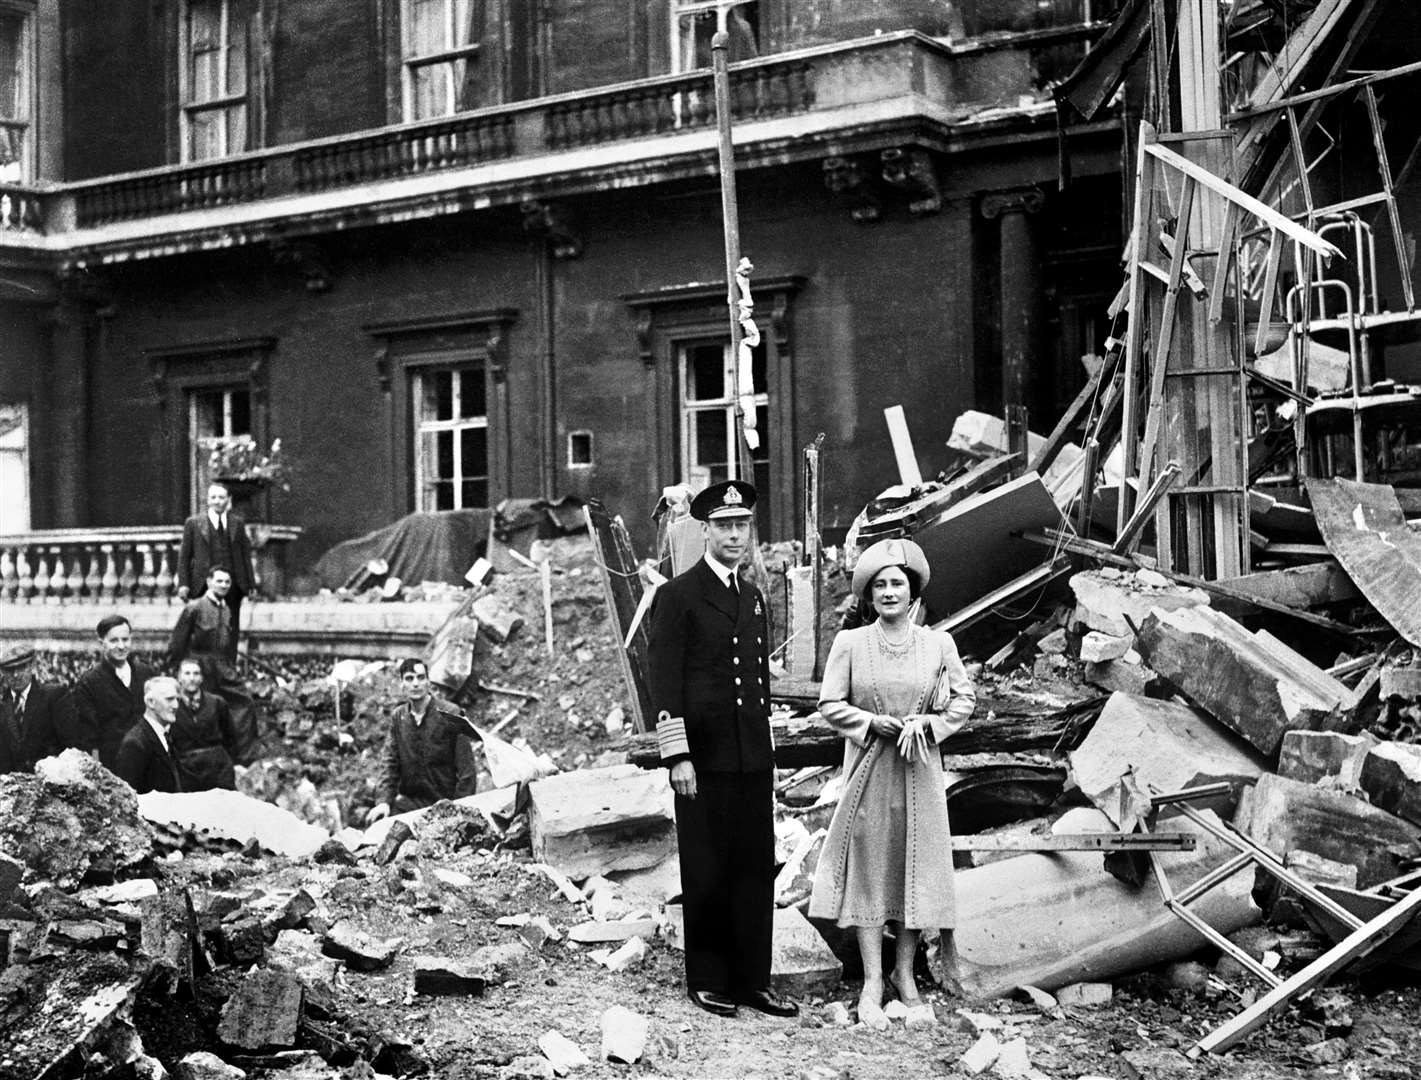 King George VI and the Queen Mother survey bomb damage at Buckingham Palace – care home residents told William and Kate about air attacks they had suffered (PA)